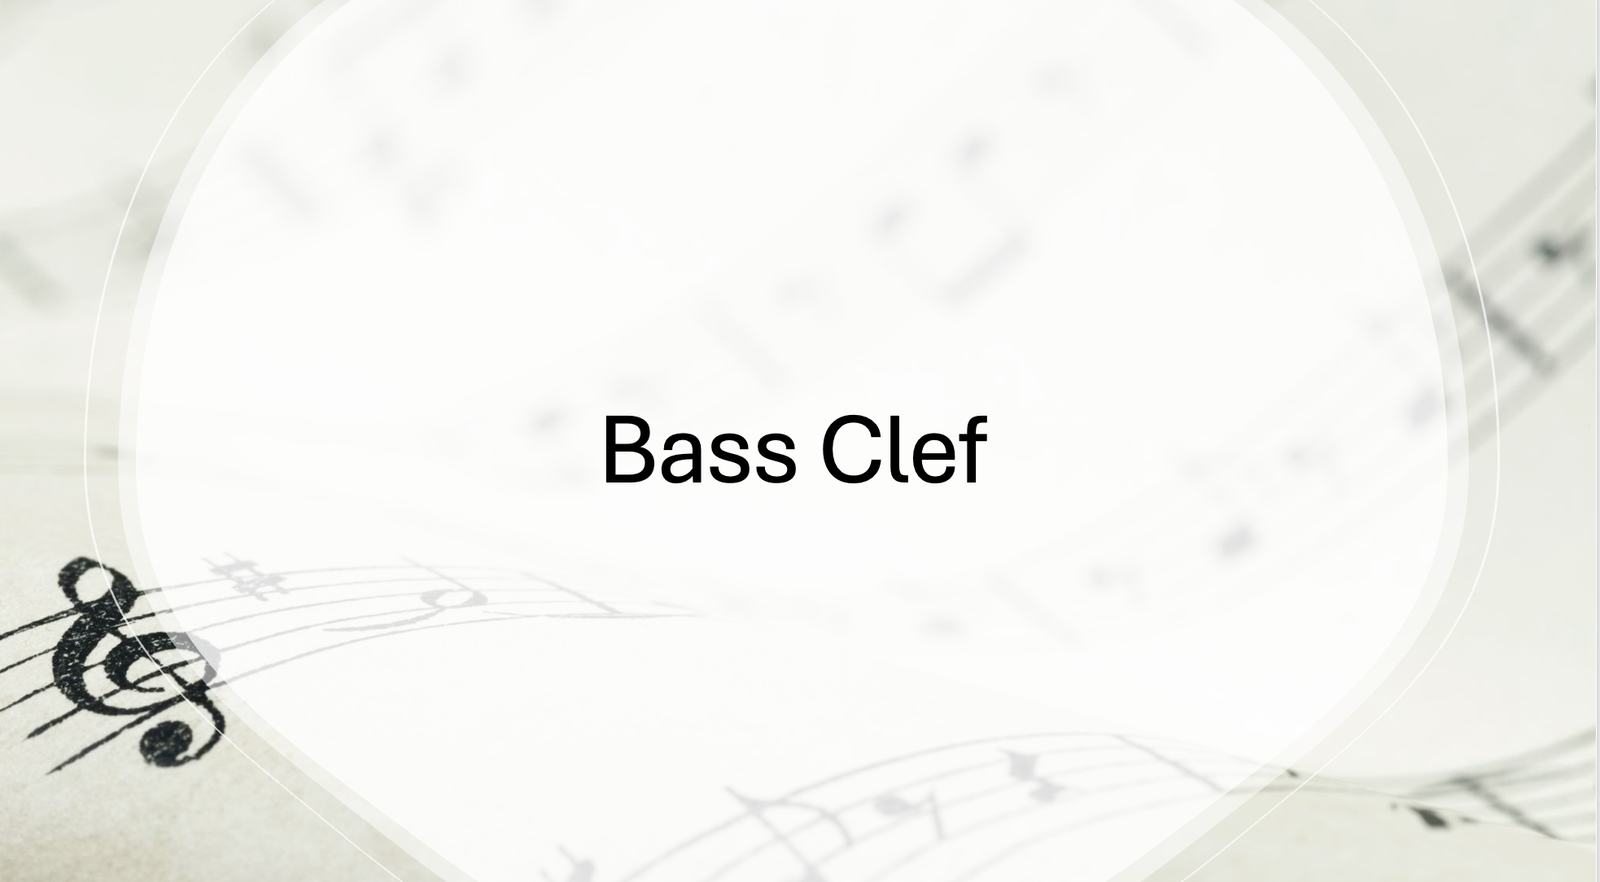 Music sheet with bass clef symbol.